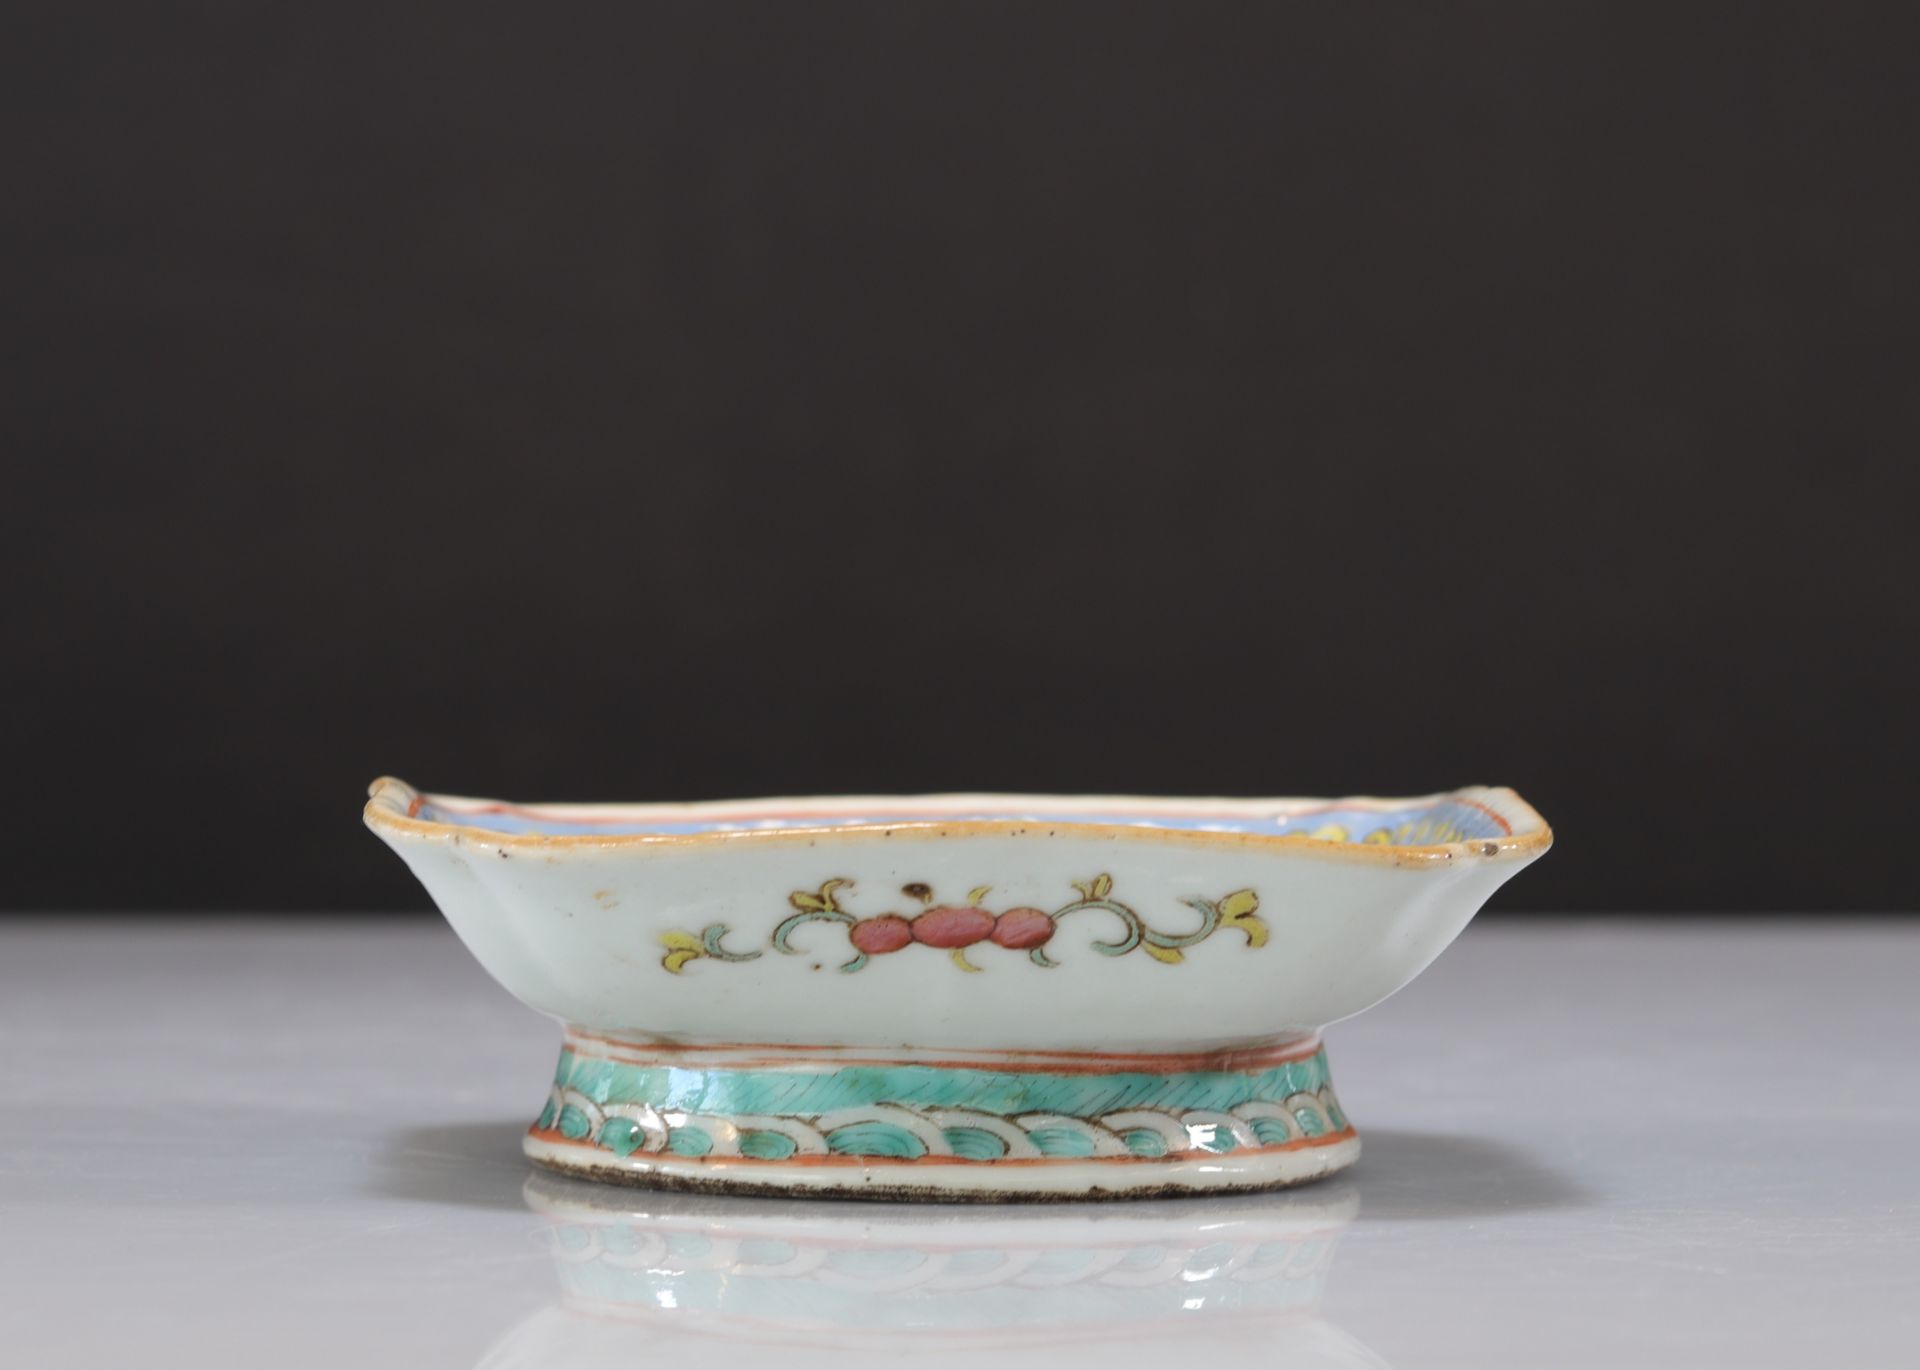 Famille rose porcelain dish with yellow background - Image 6 of 6